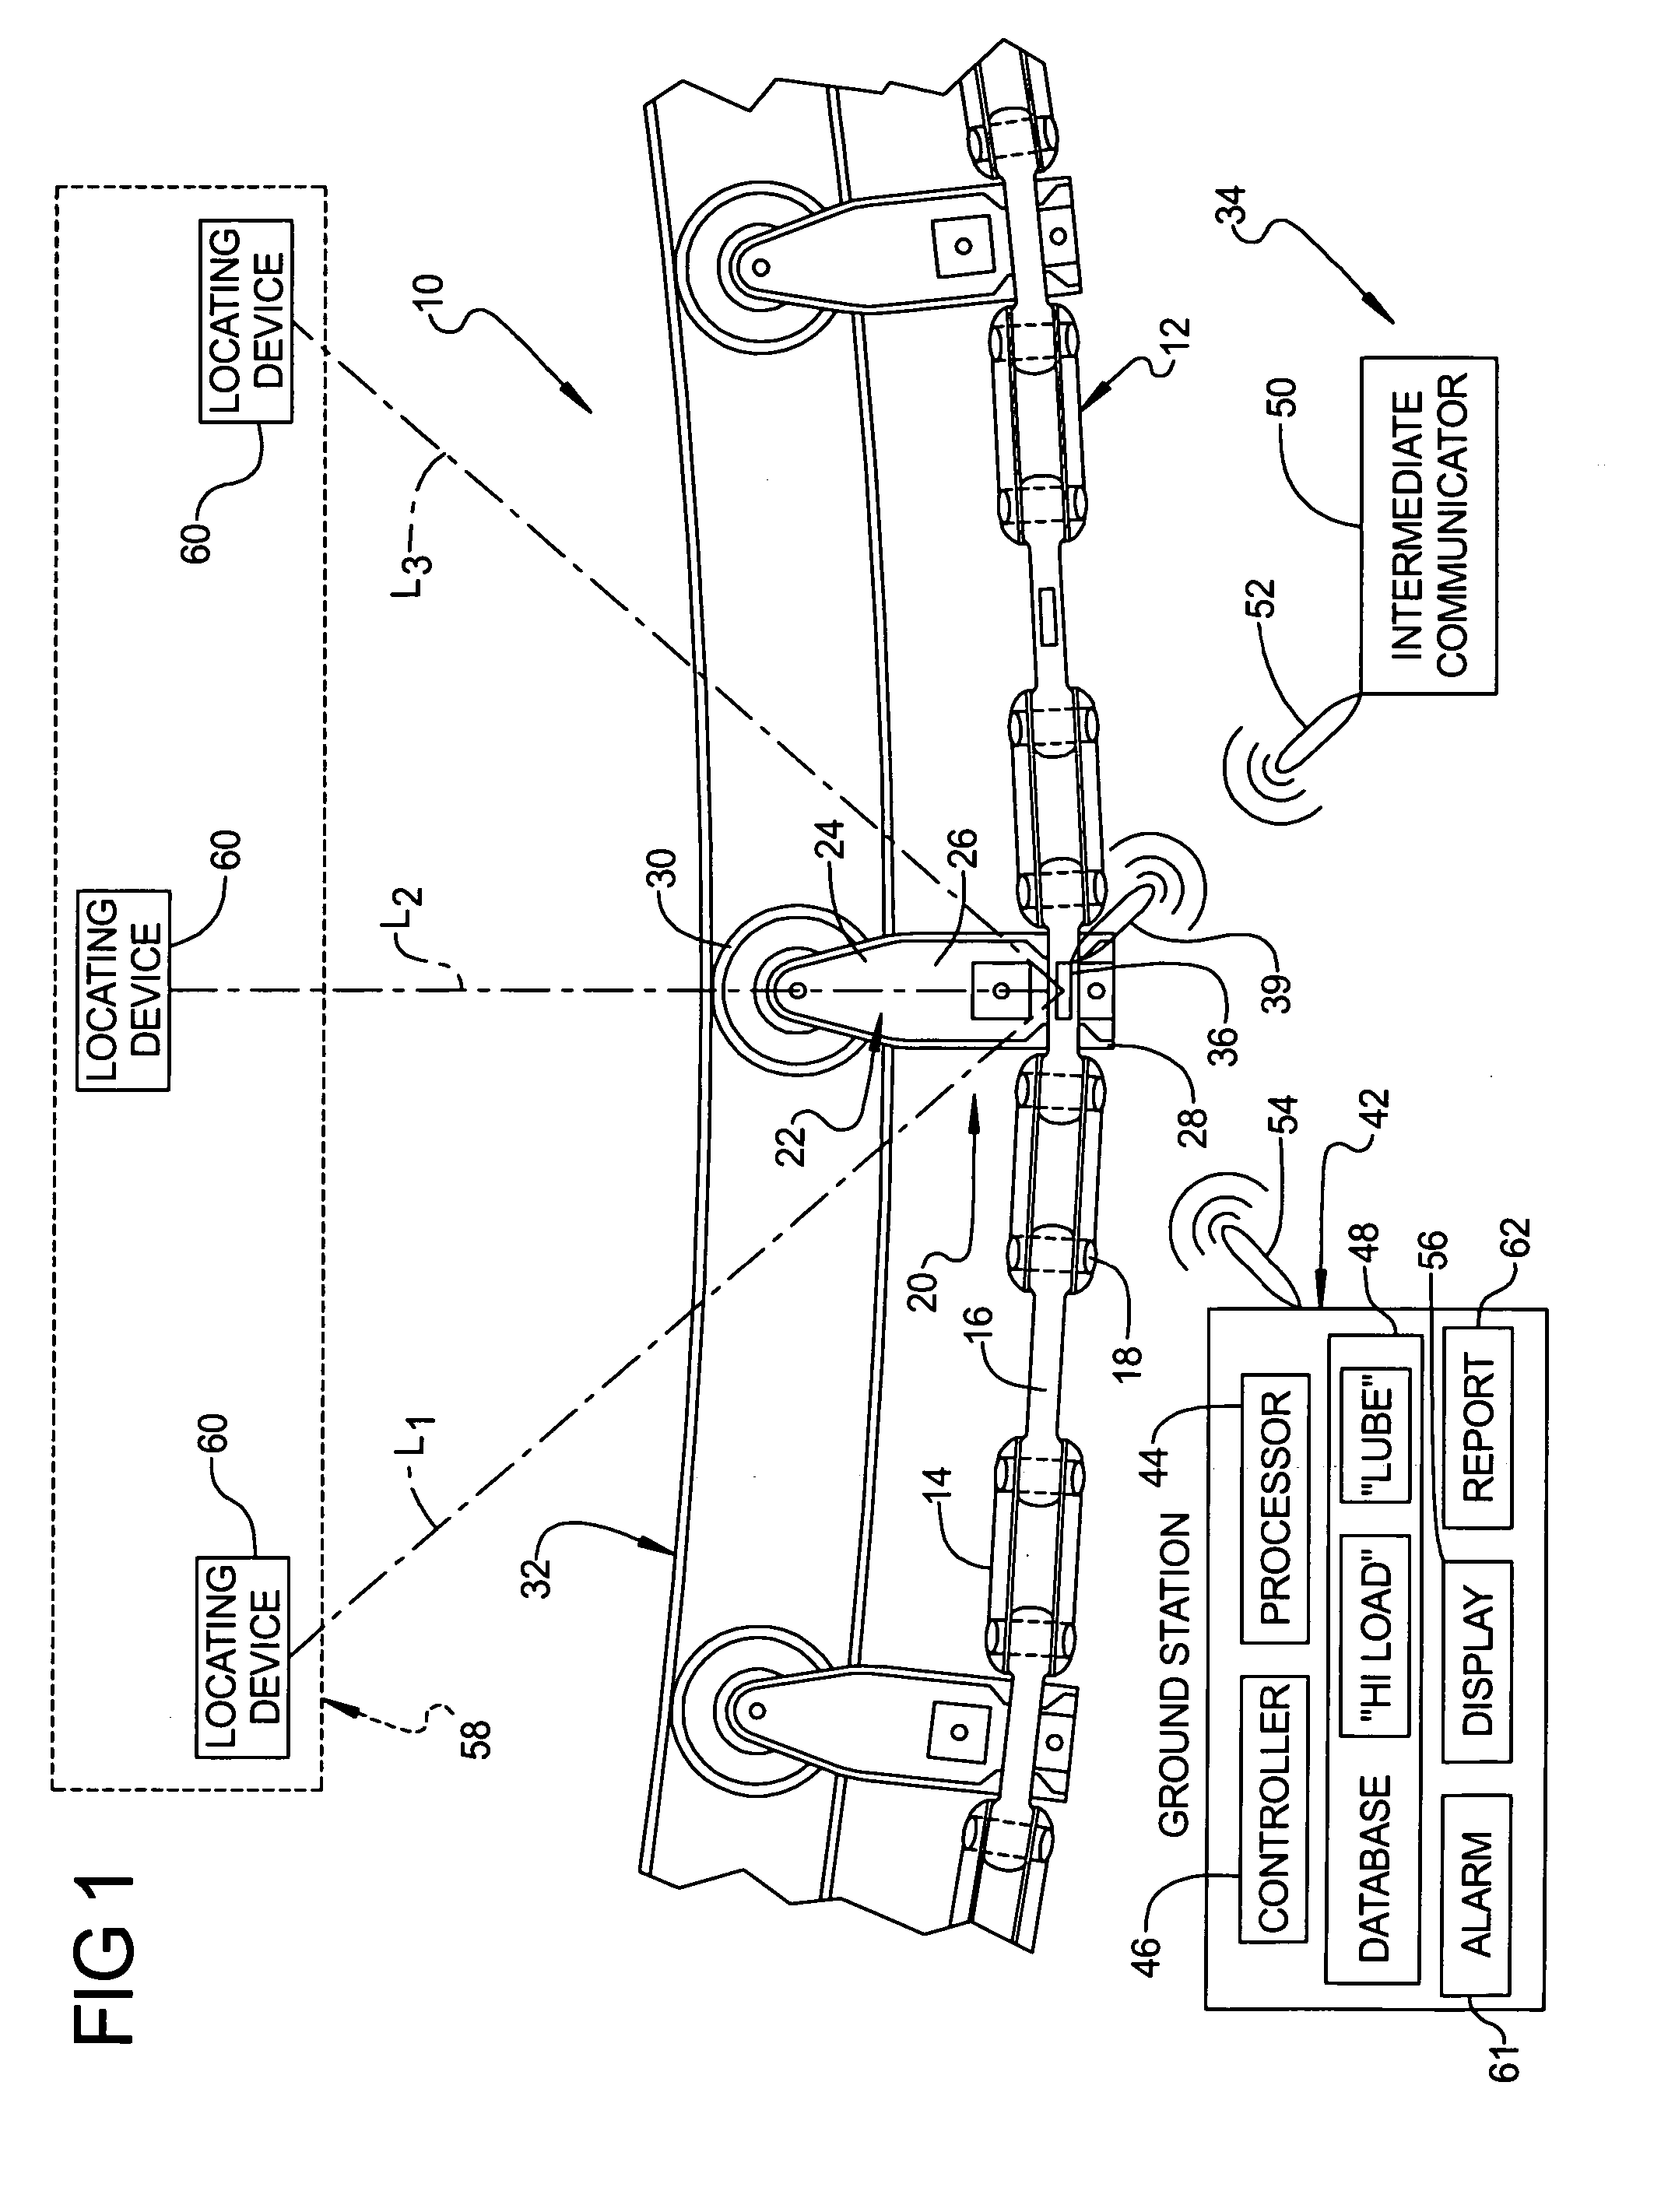 Conveyor diagnostic system having local positioning system